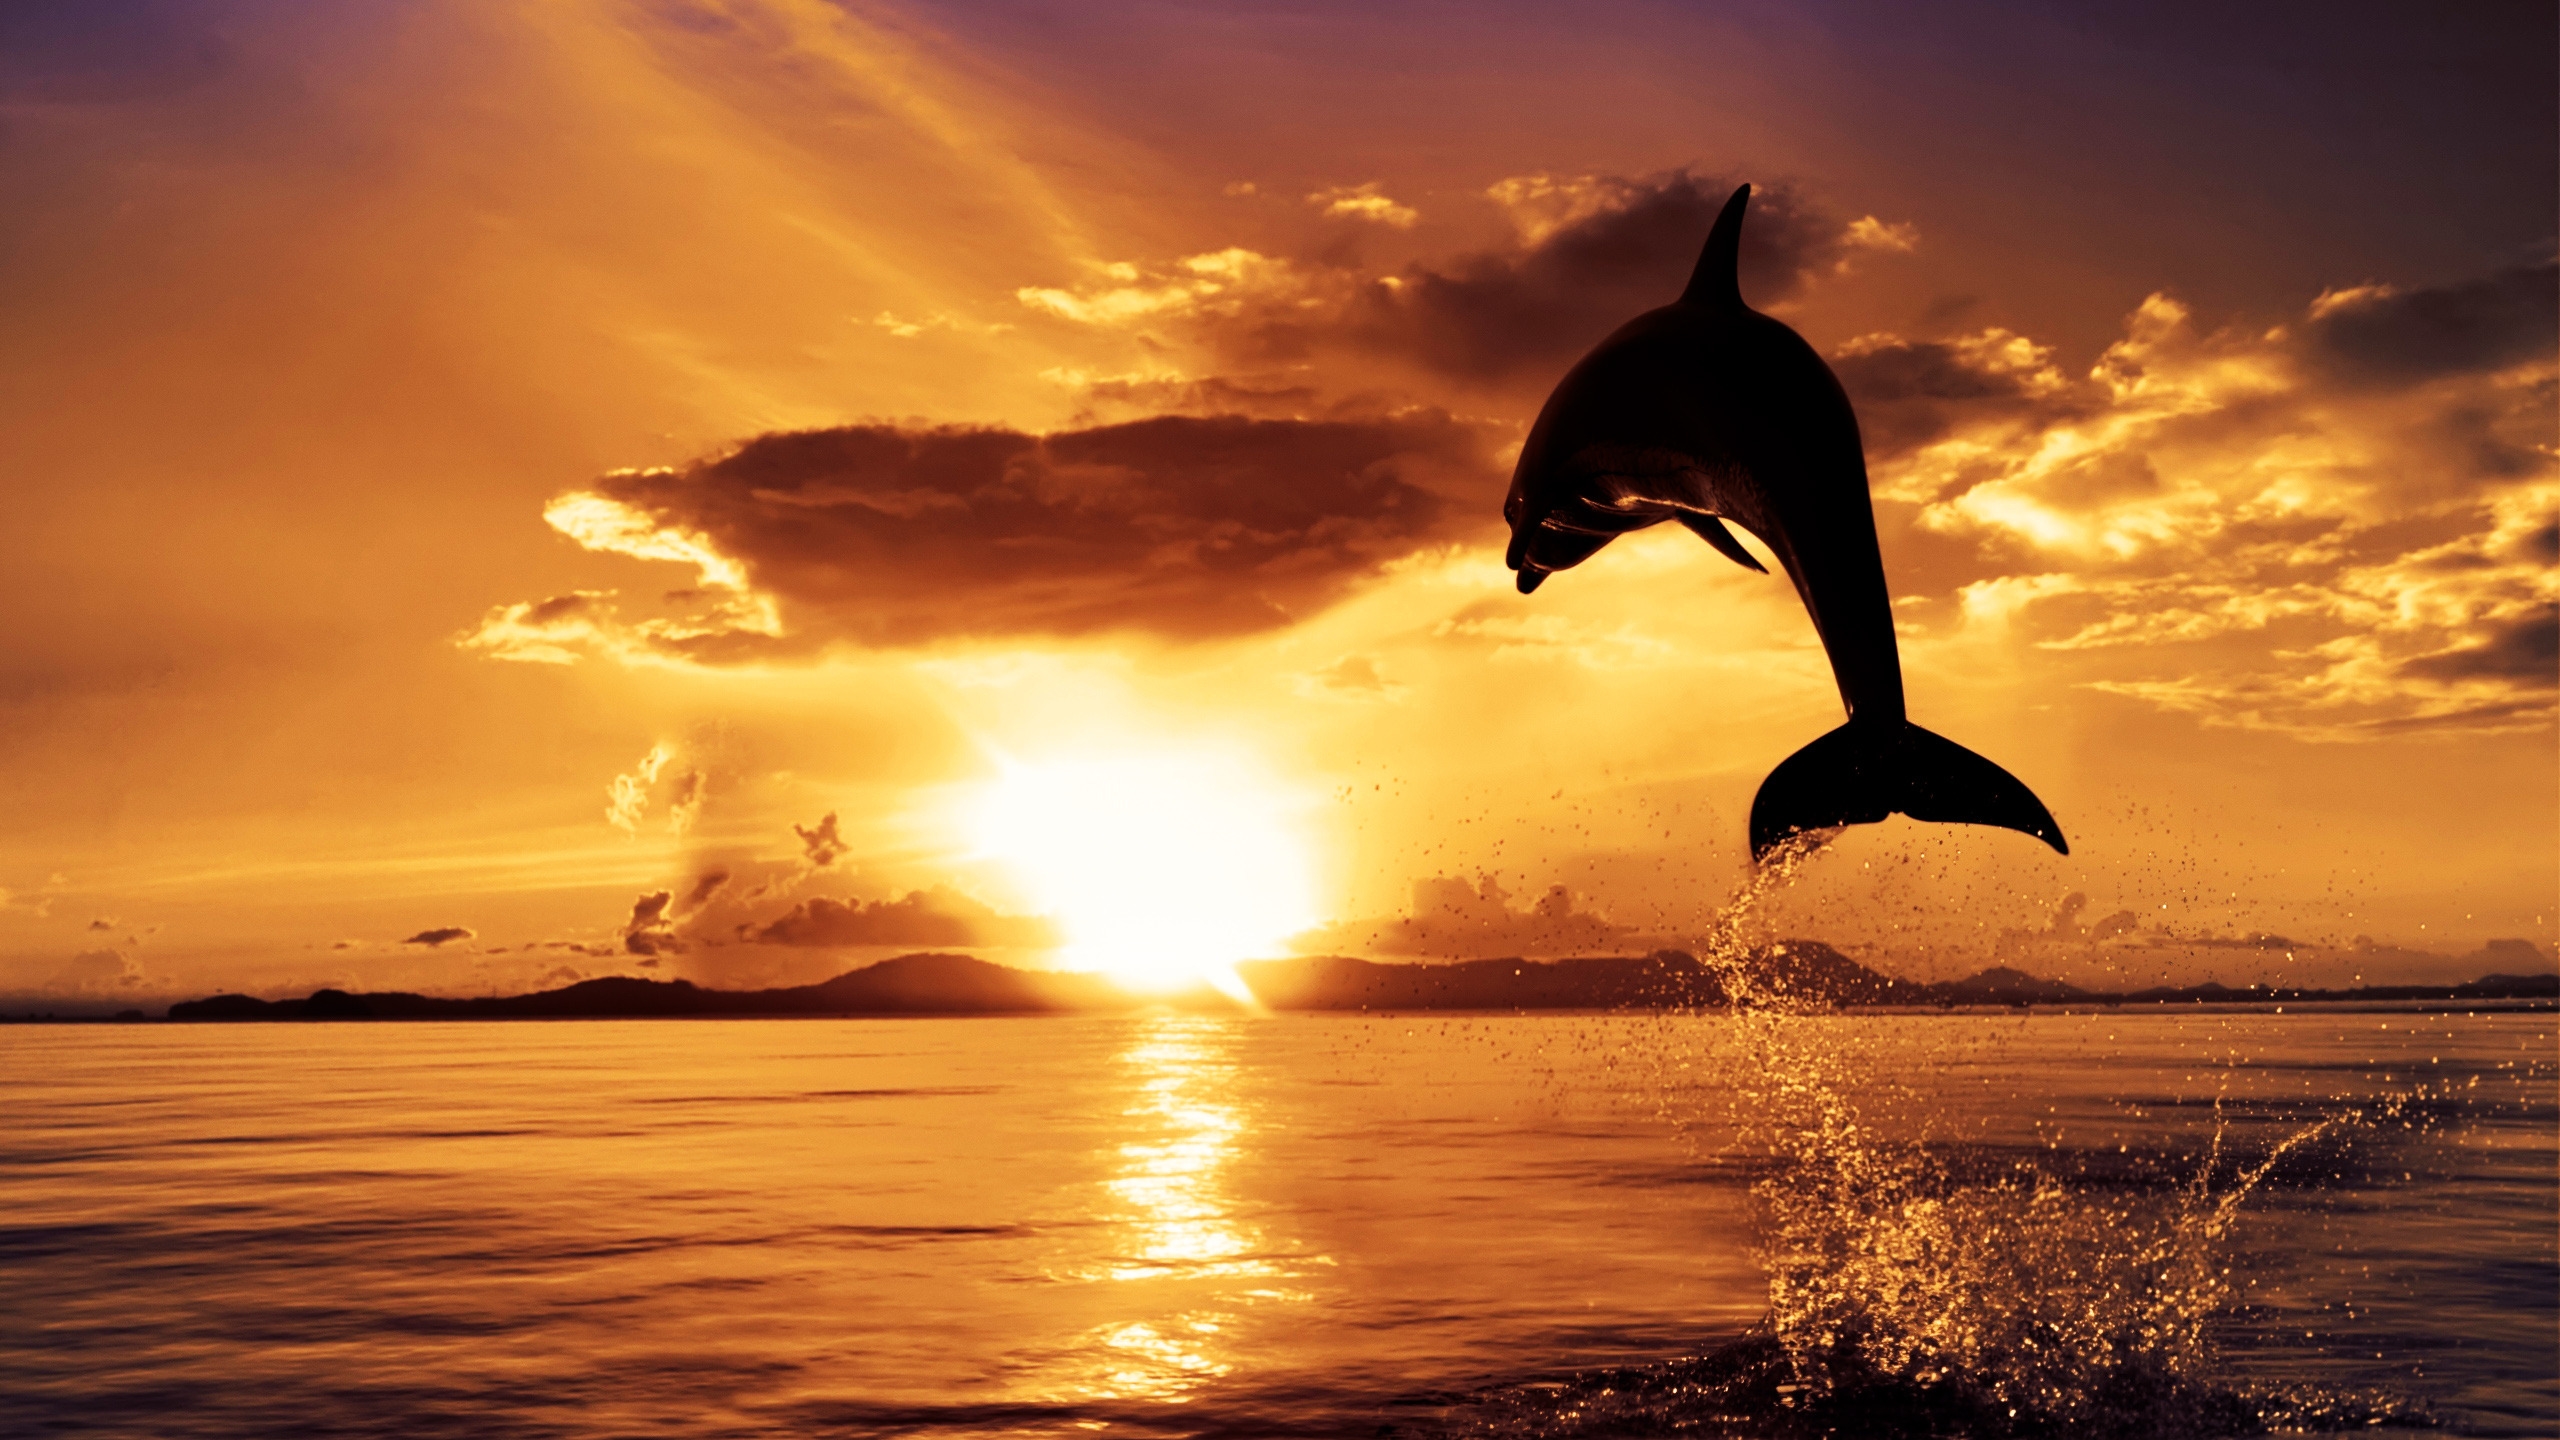 Dolphin in the Air for 2560x1440 HDTV resolution